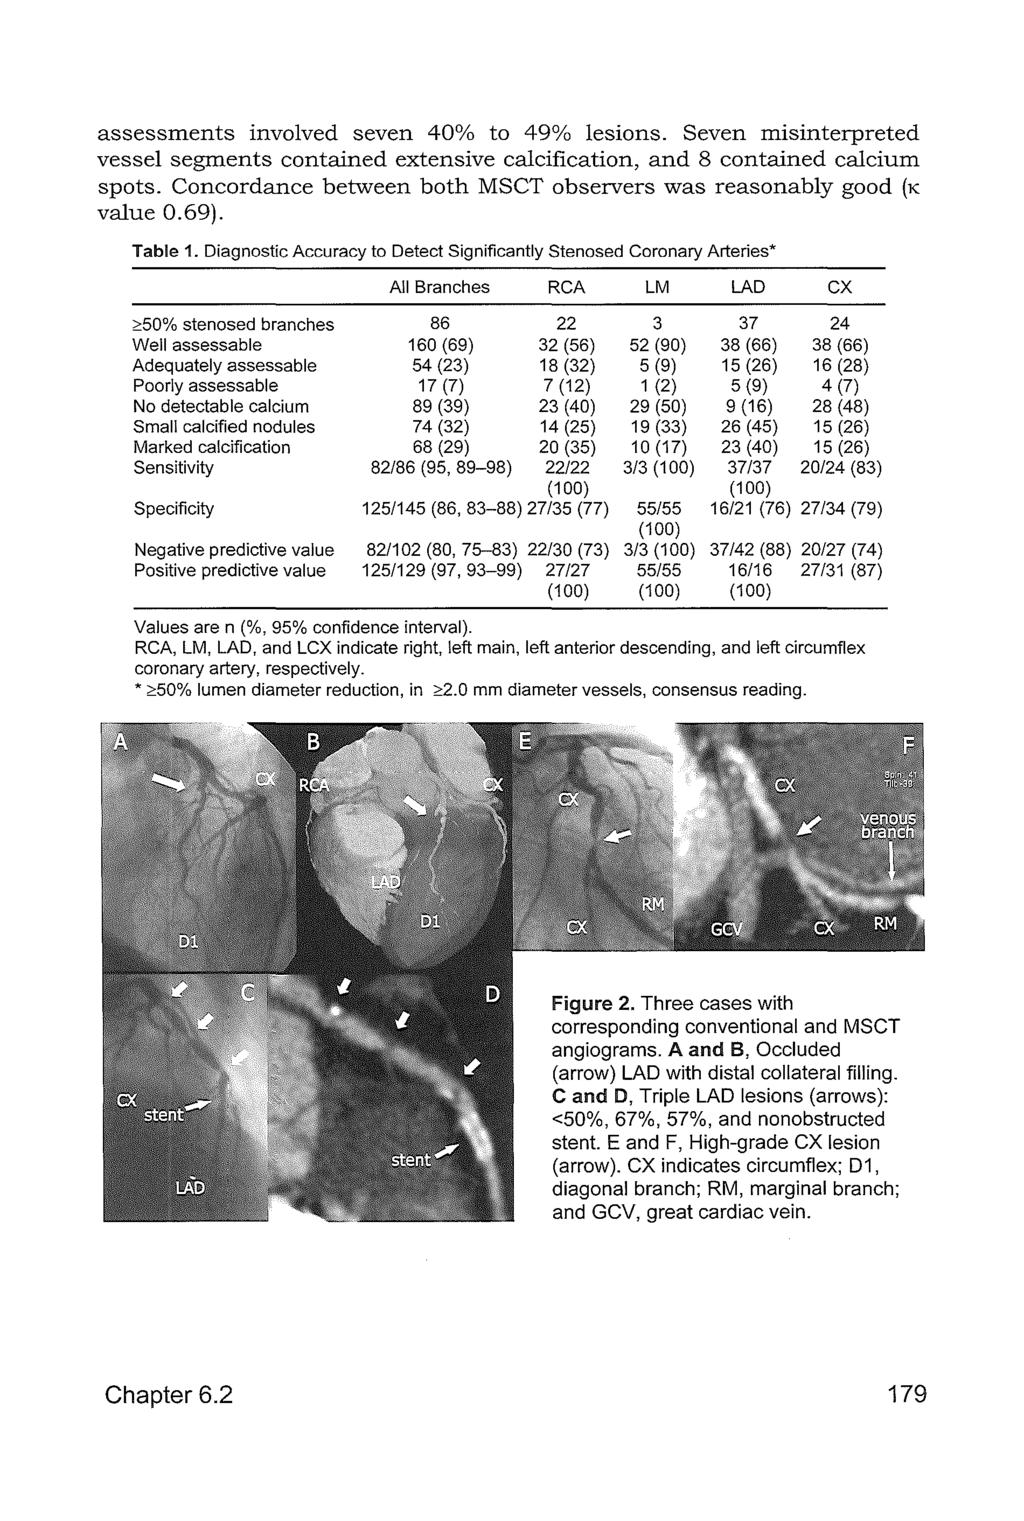 assessments involved seven 40% to 49% lesions. Seven misinterpreted vessel segments contained extensive calcification, and 8 contained calcium spots.